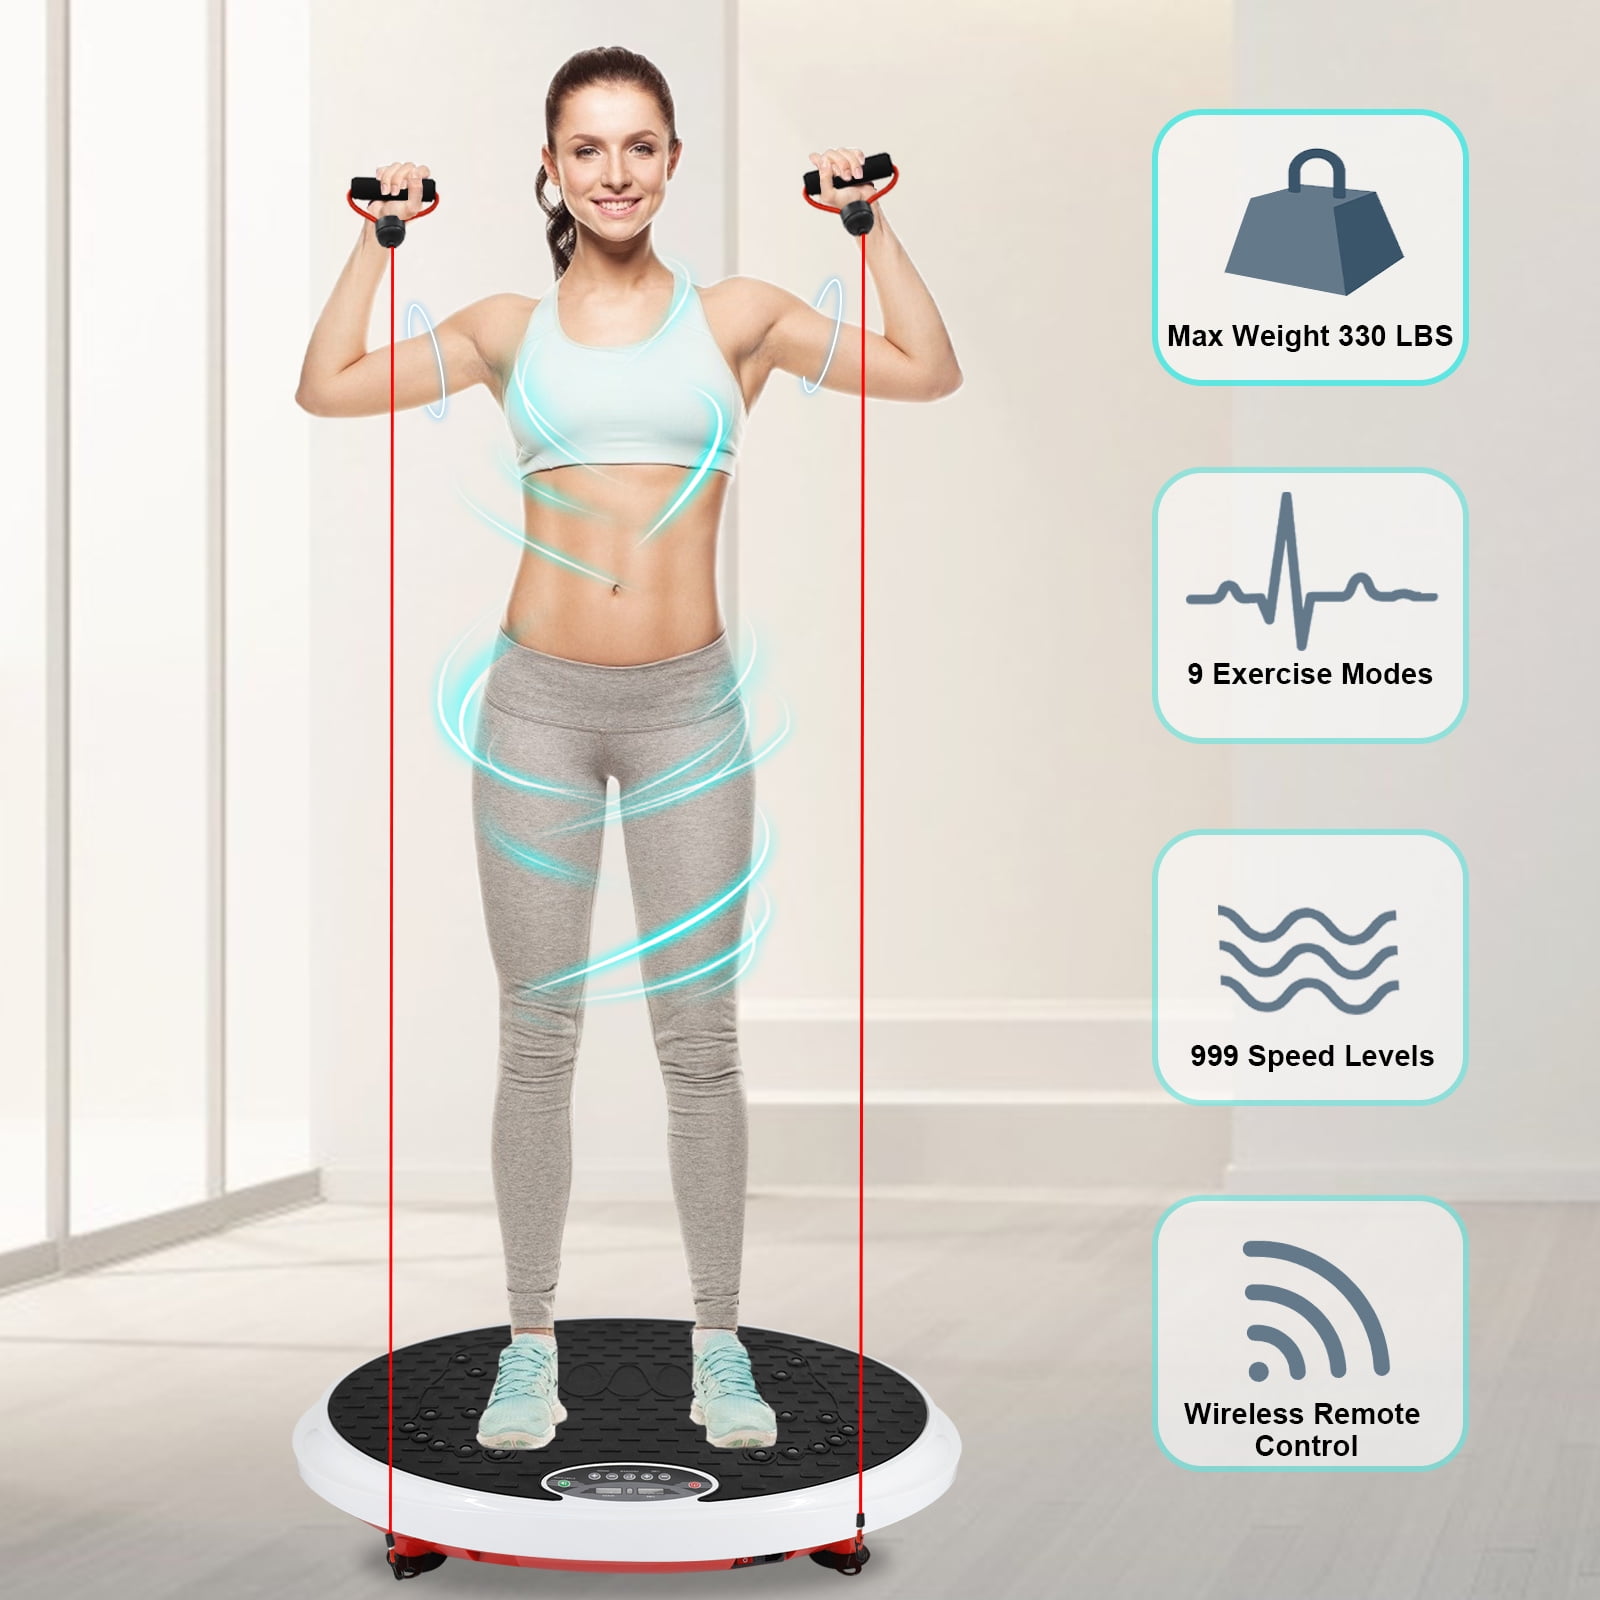 Vibration Plate Exercise Machine Whole Body Workout Vibrate Fitness Platform with Music Speaker Fitness Bands for Weight Loss Shaping Toning Wellness Home Gyms Workout 